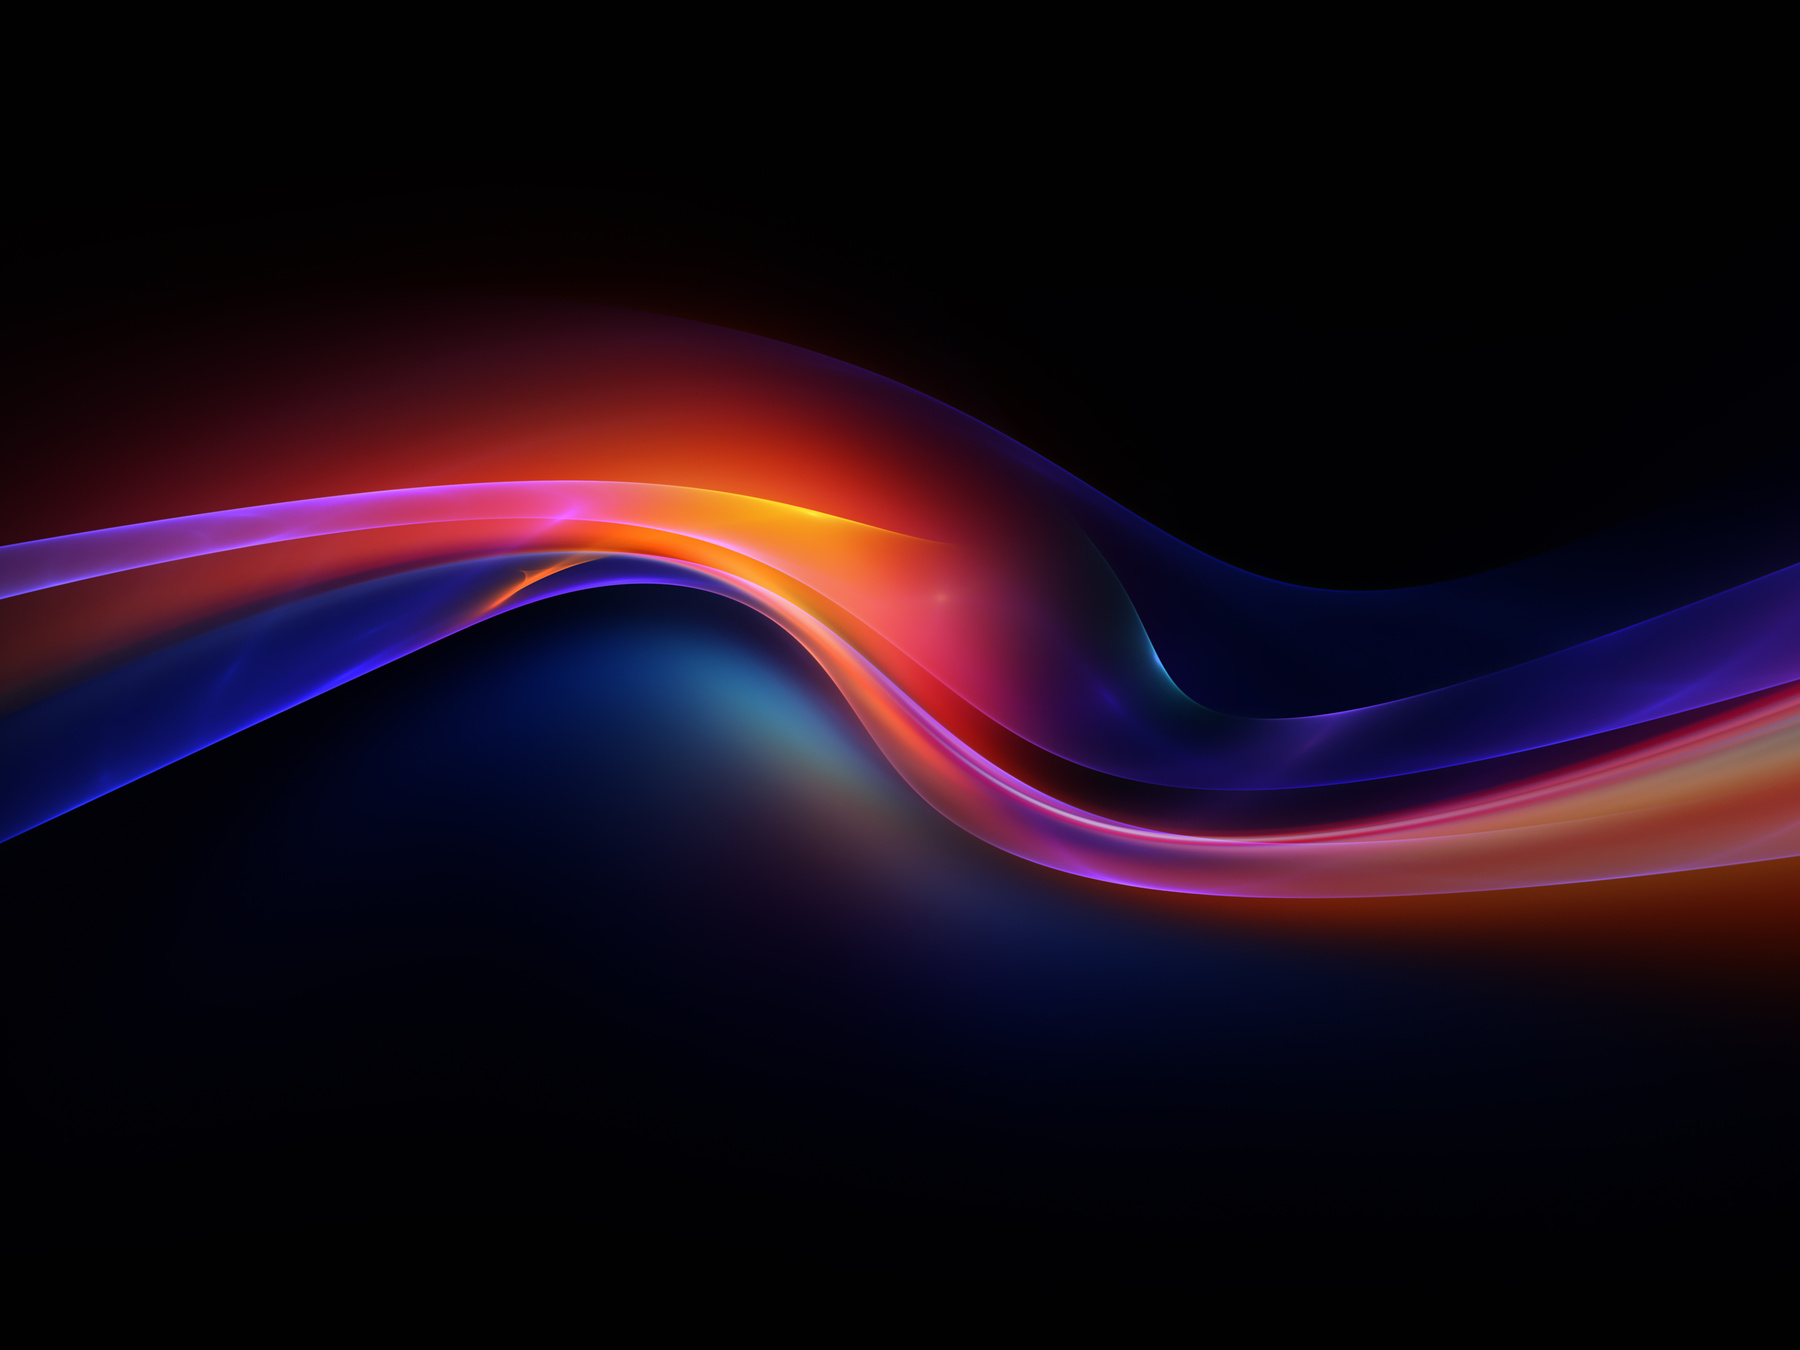 Red and blue gradient wave patterns on black